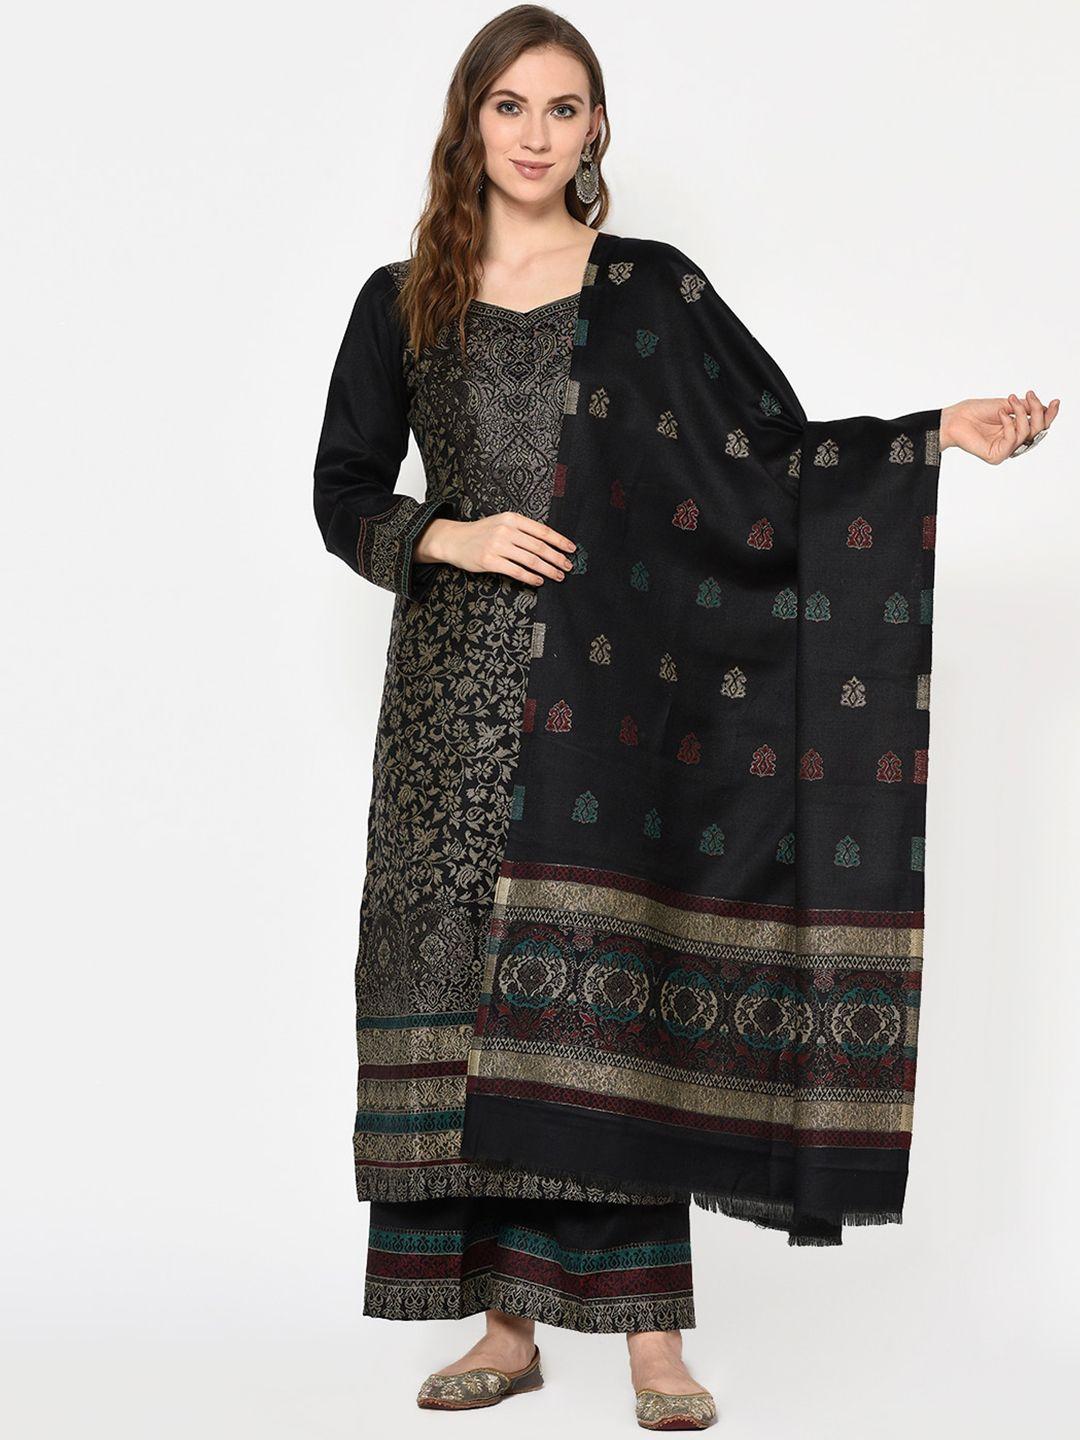 safaa-women-black-viscose-acrylic-woven-design-suit-unstitched-dress-material-for-winter